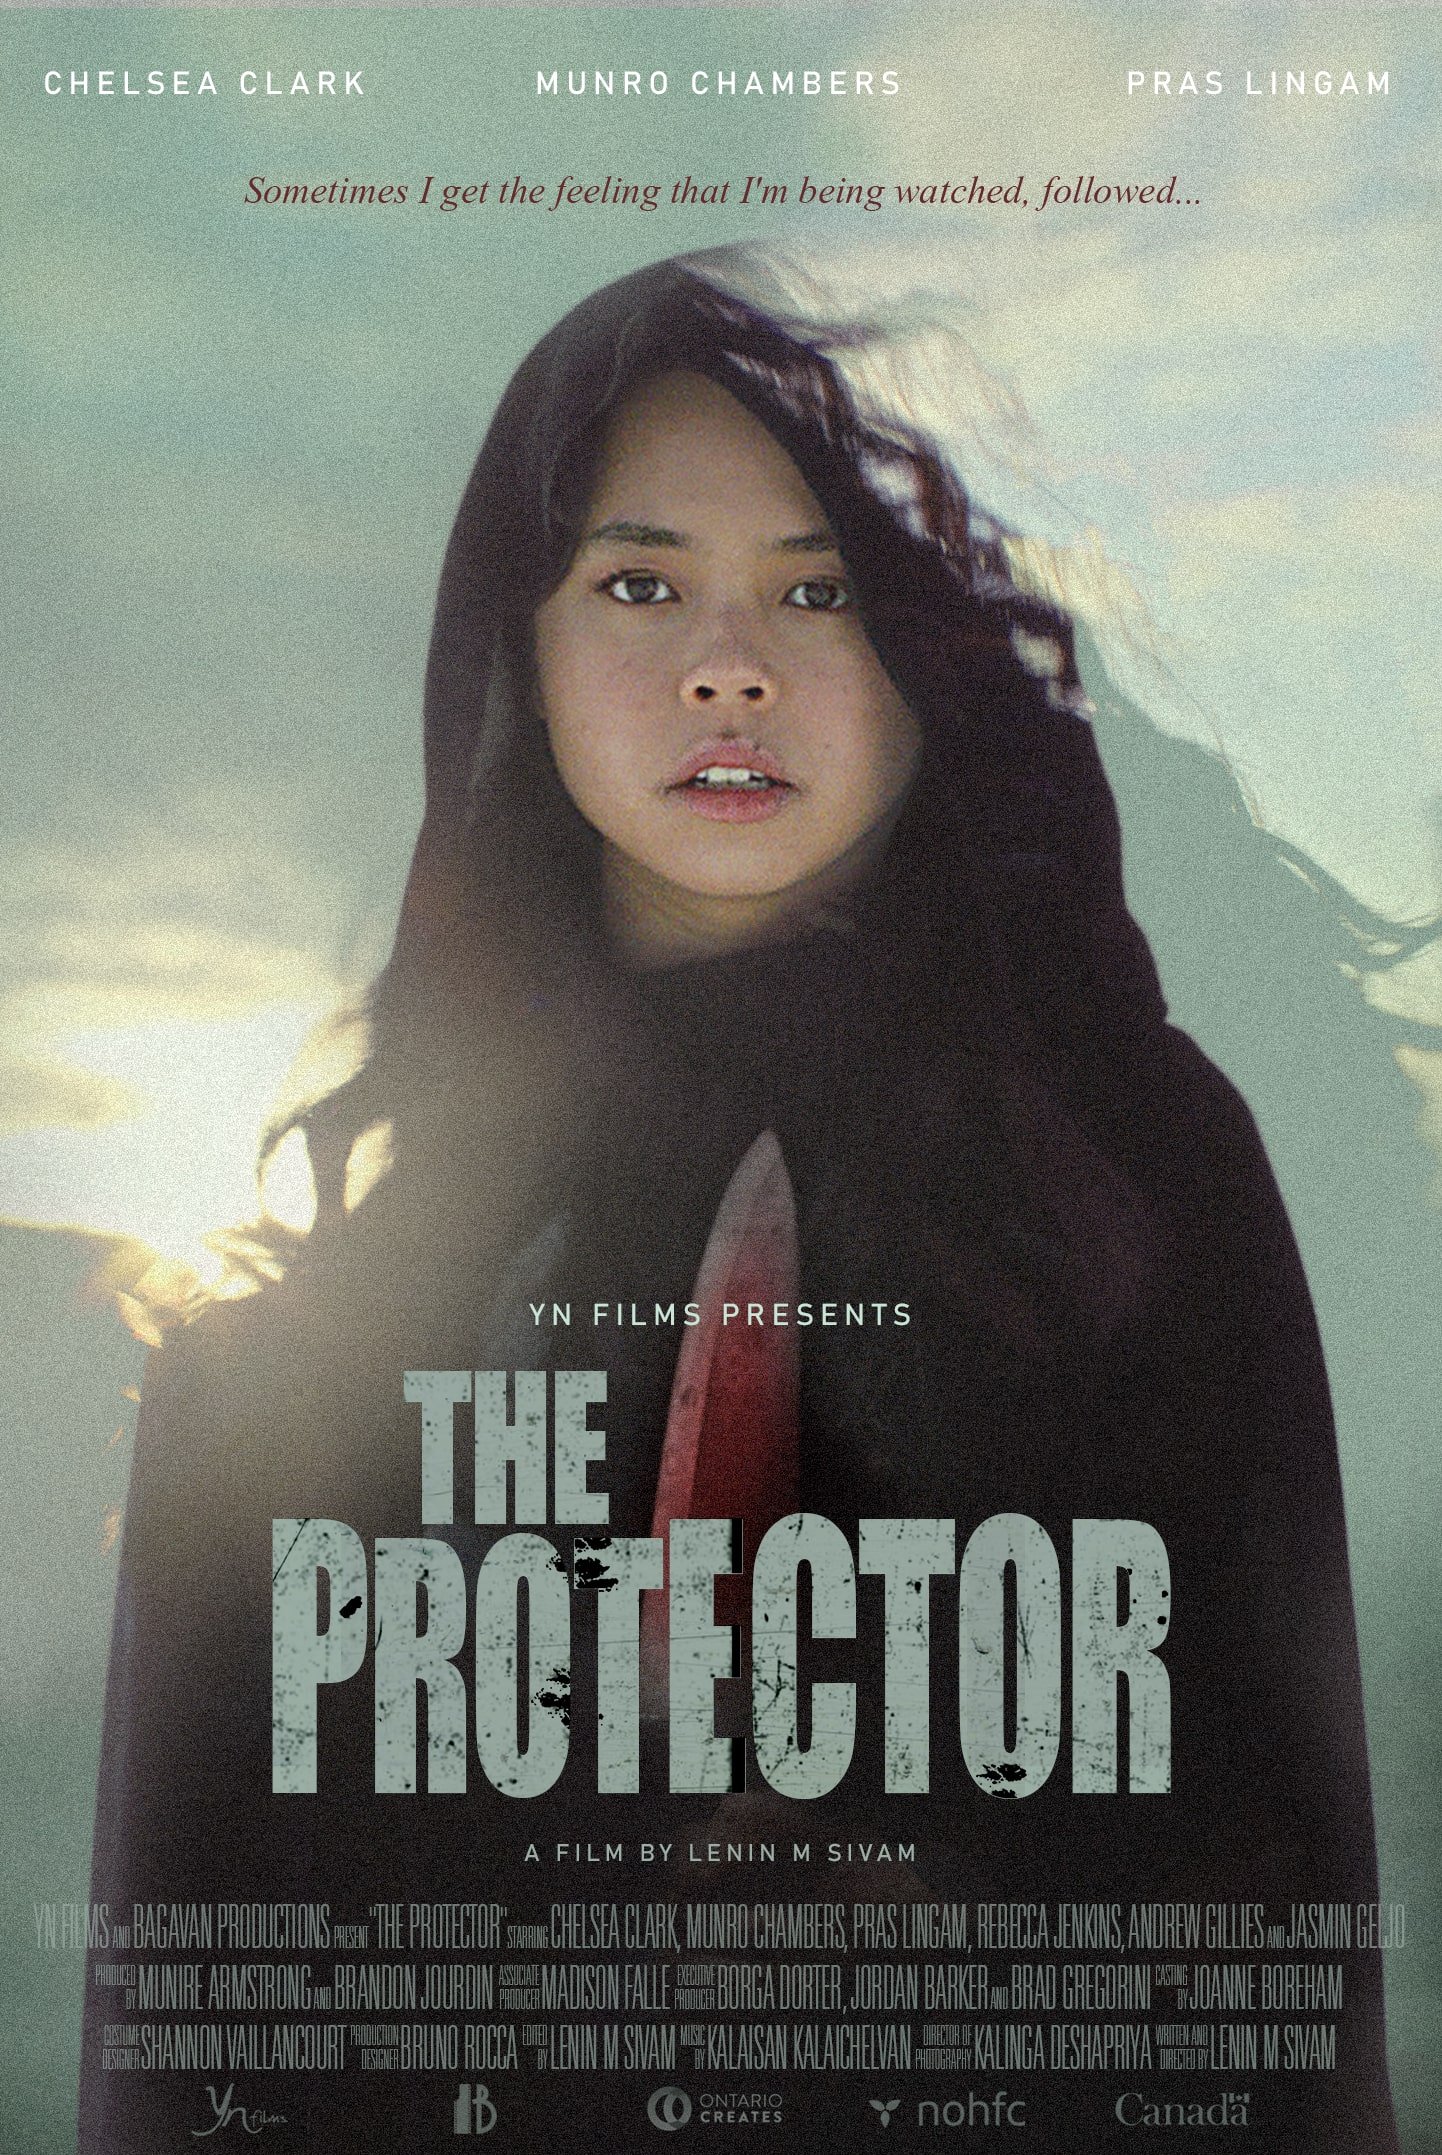 The Protector poster-min.jpg